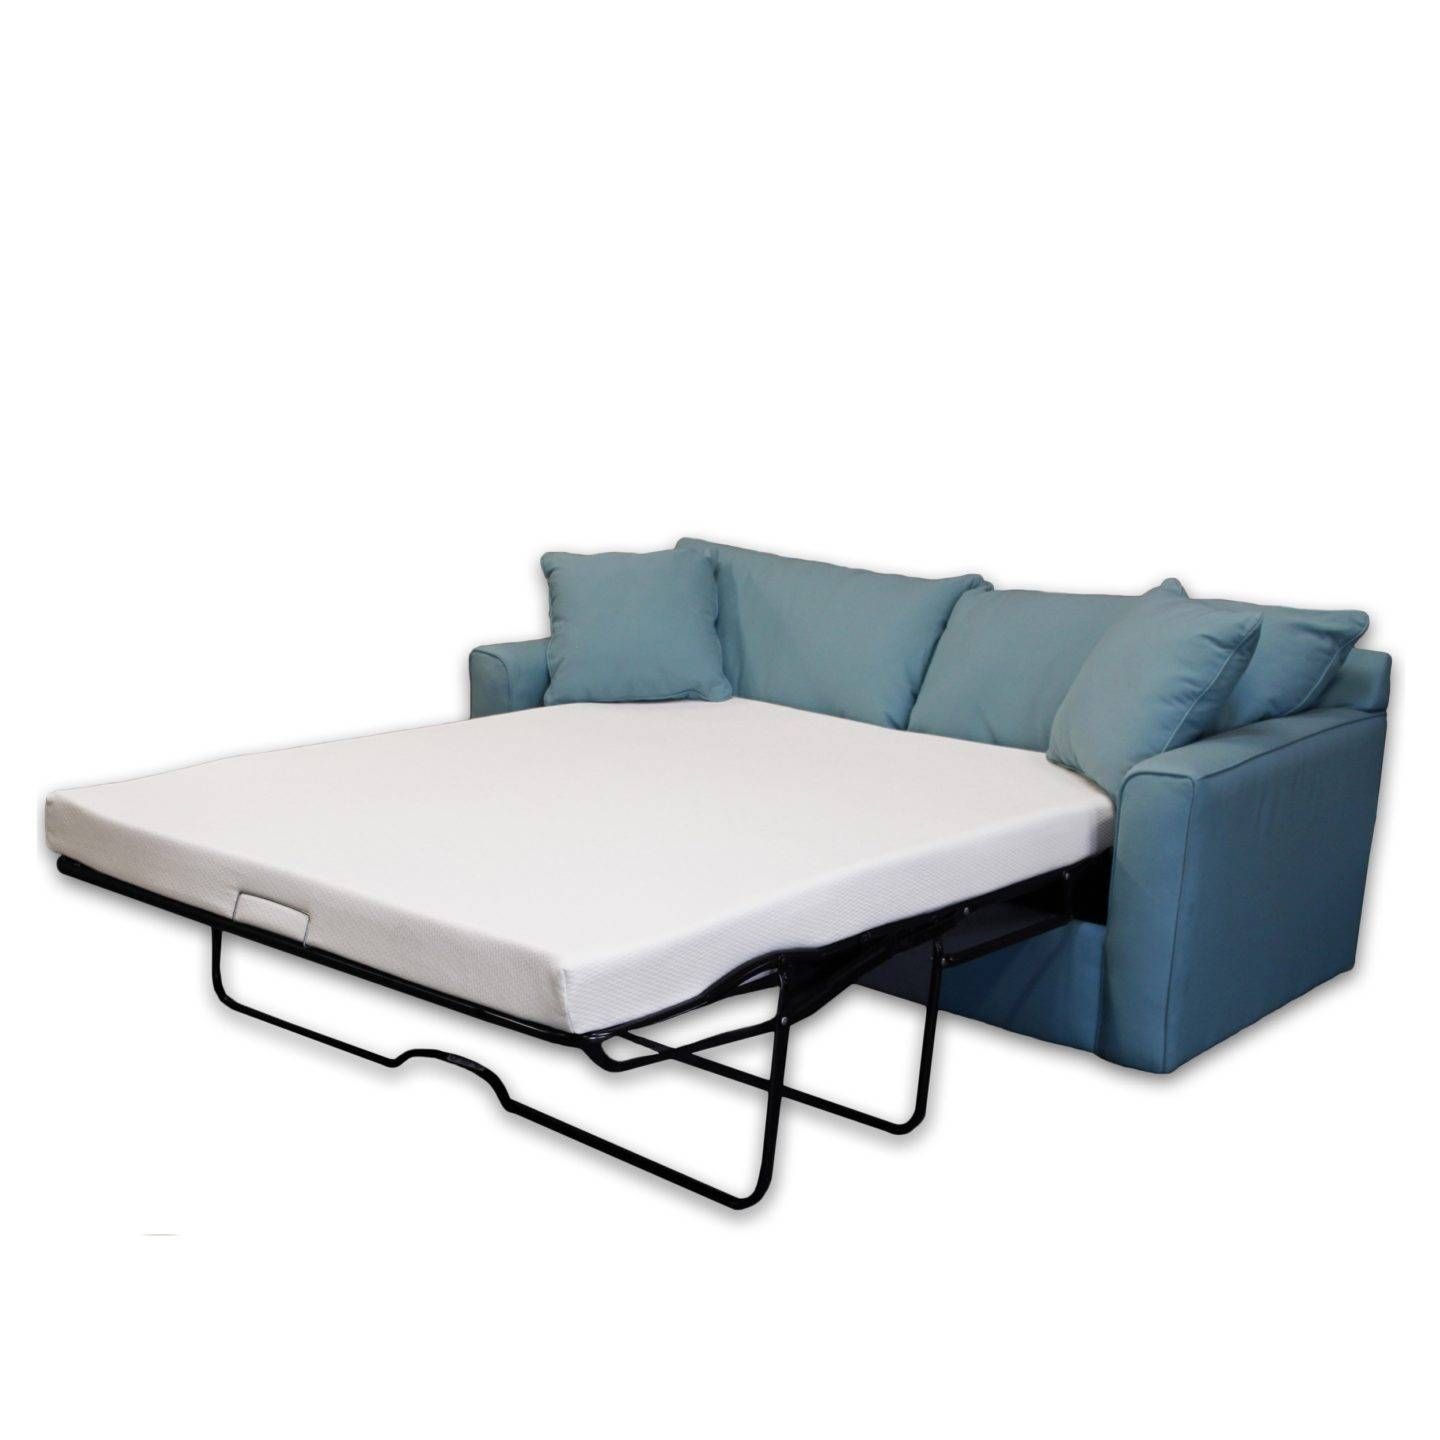 How To Make A Pull Out Sofa Bed More Comfortable Overstock Throughout Queen Size Sofa Bed Sheets 